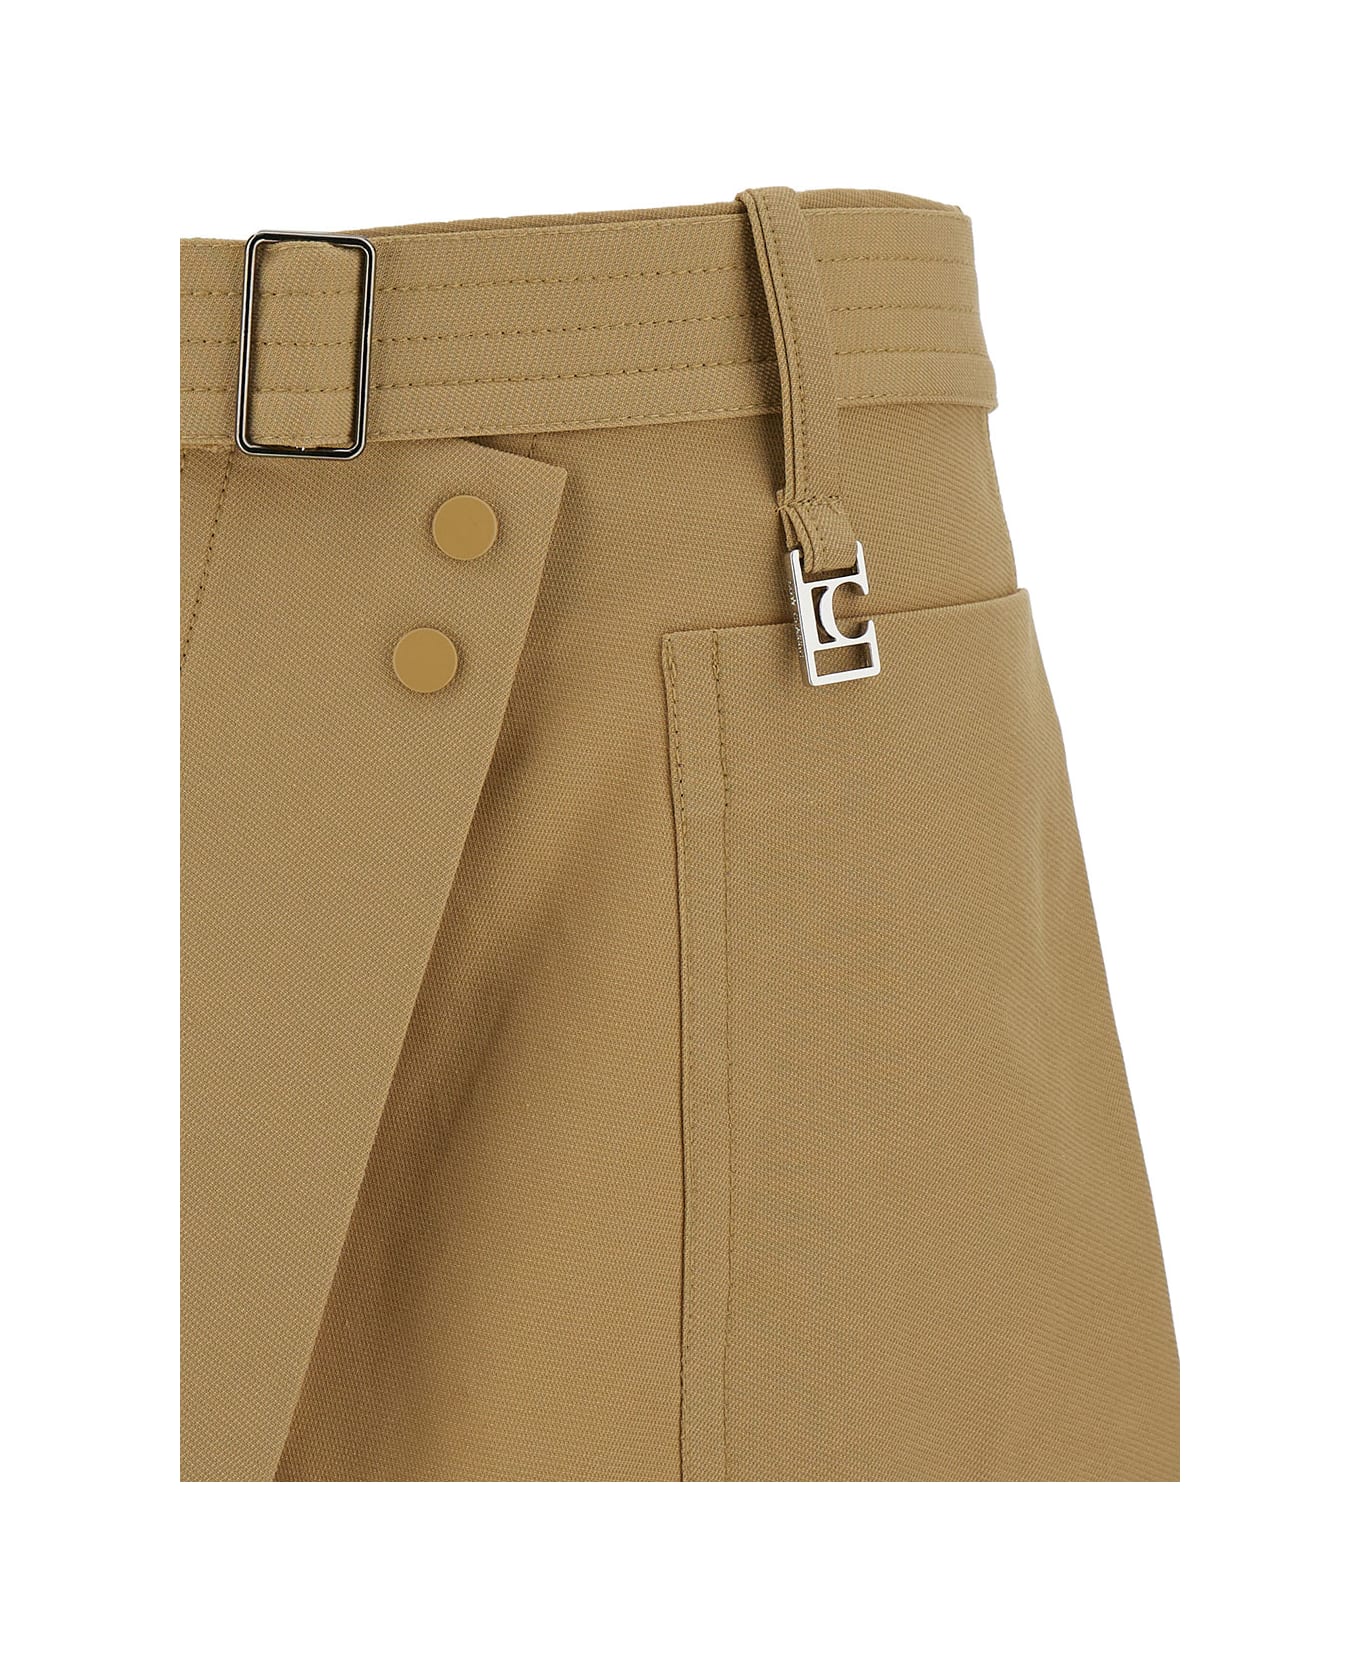 Low Classic Beige Asymmetric Mini-skirt With Logo Charm In Cotton Blend Woman - Beige ショートパンツ